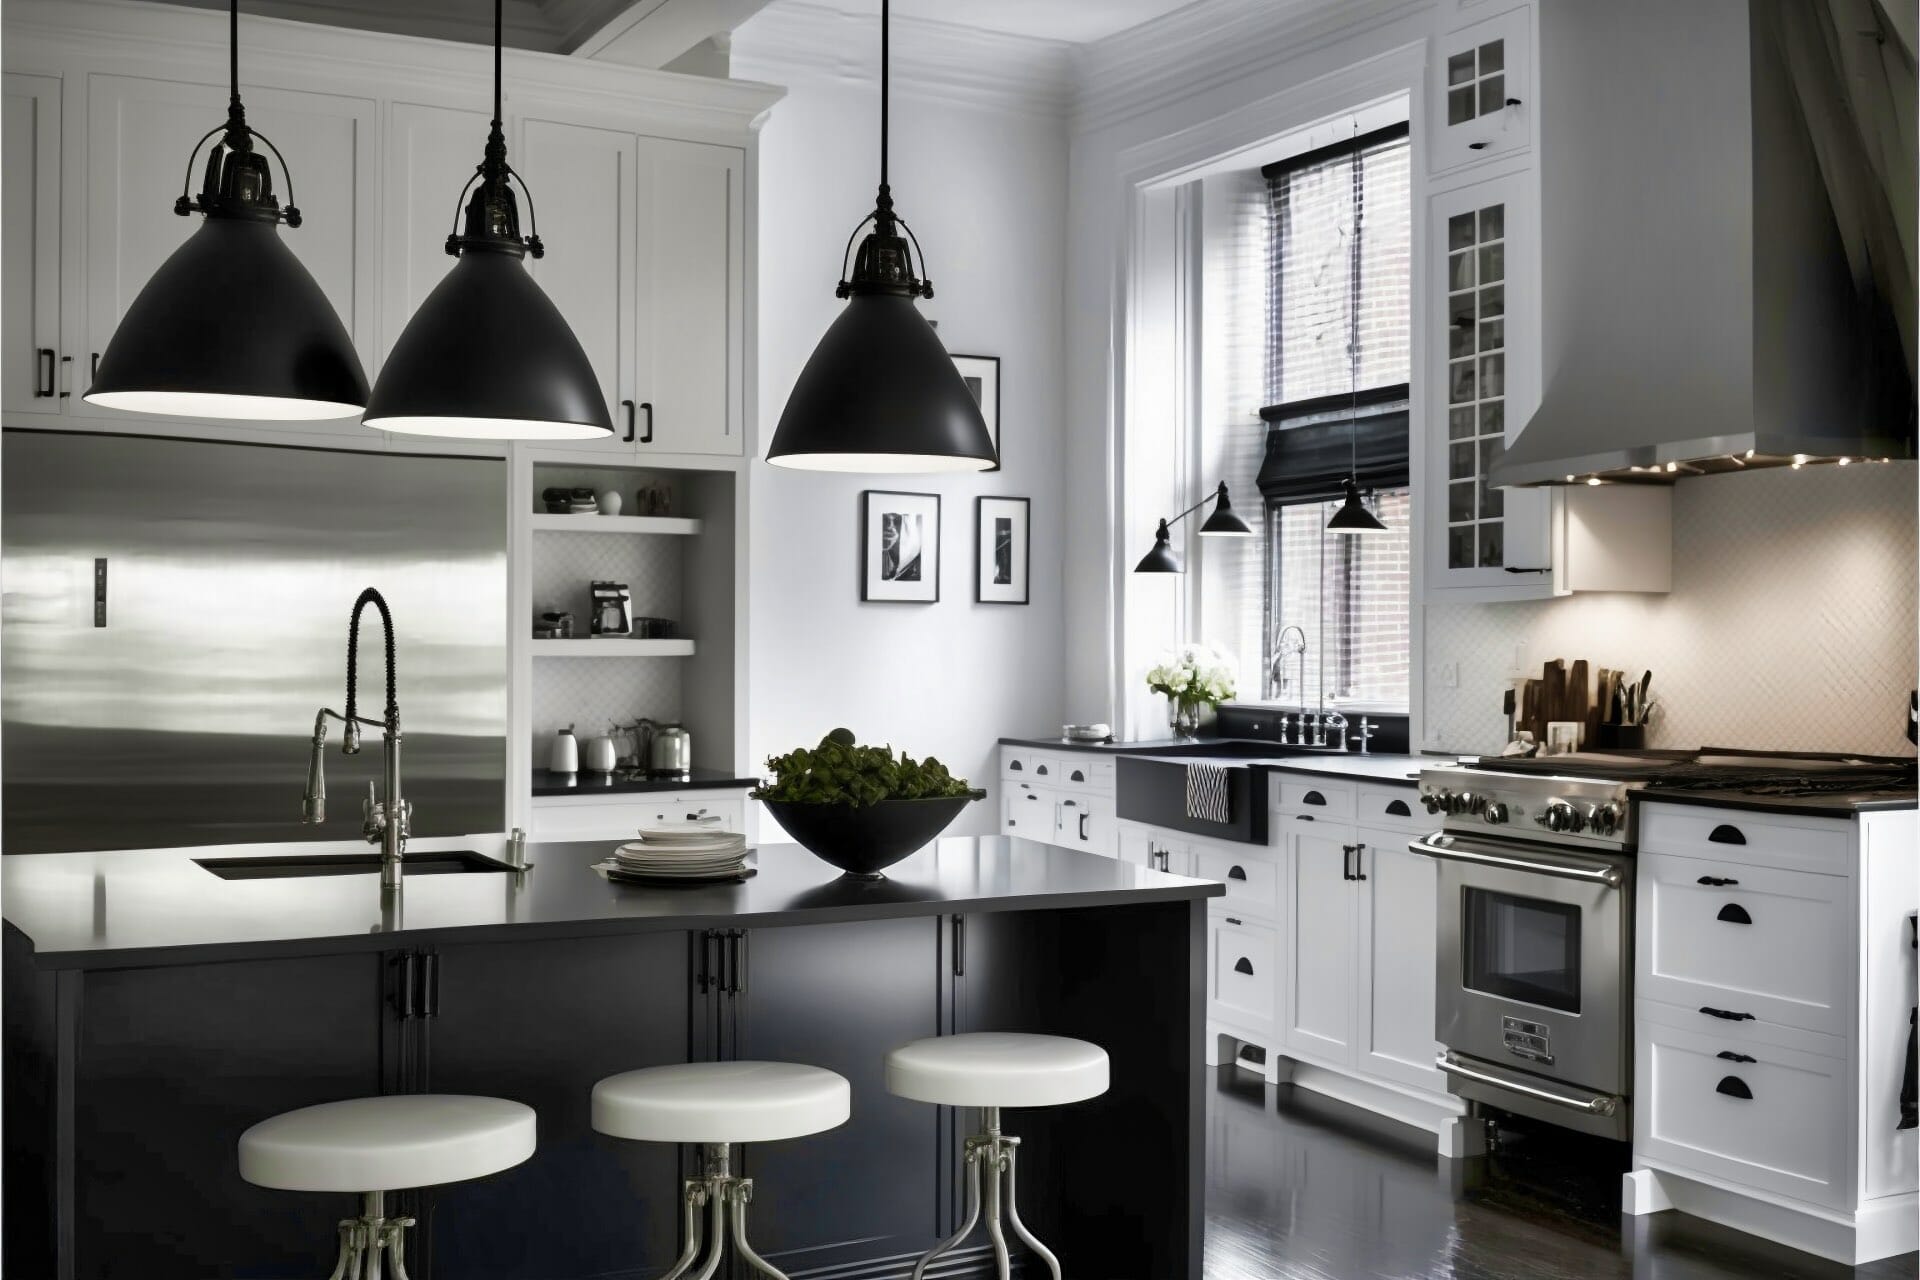 Modern Monochrome Black And White Kitchen With Industrial